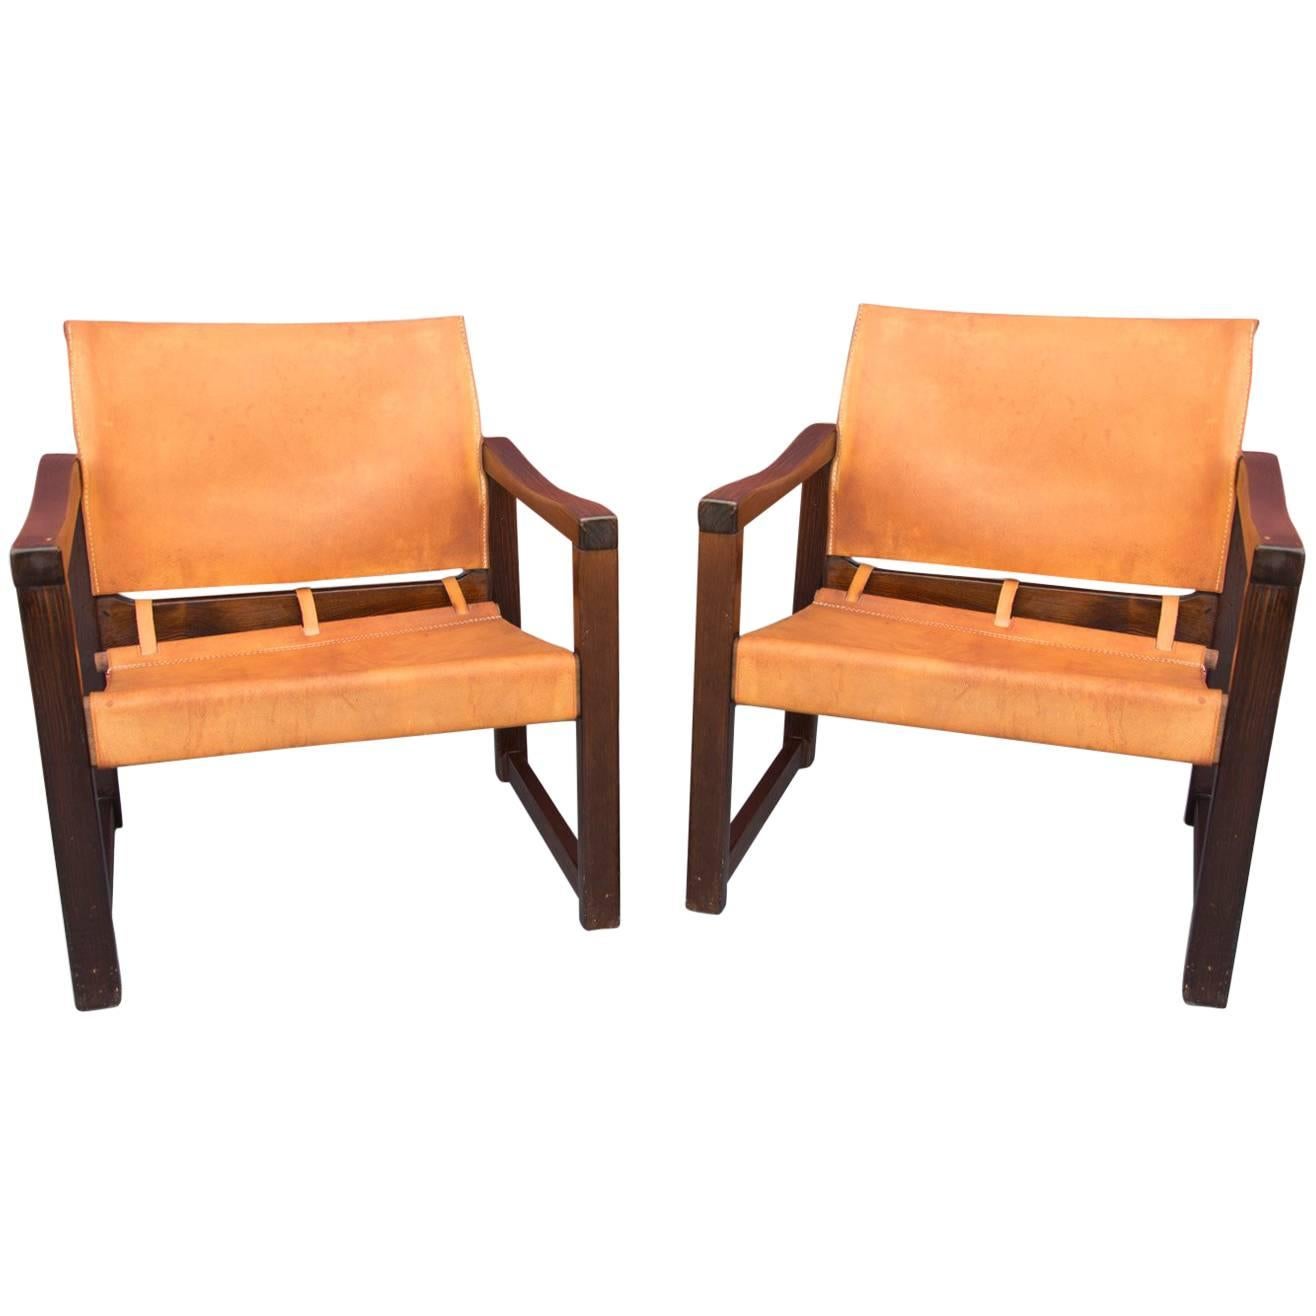 This living set consists of a pair leather “Safari” chairs with a coffee table, both designed by the Swedish designer Karin Mobring and it was produced in the 1970s. The chairs and table features a frame made of pine and the seating is made of very